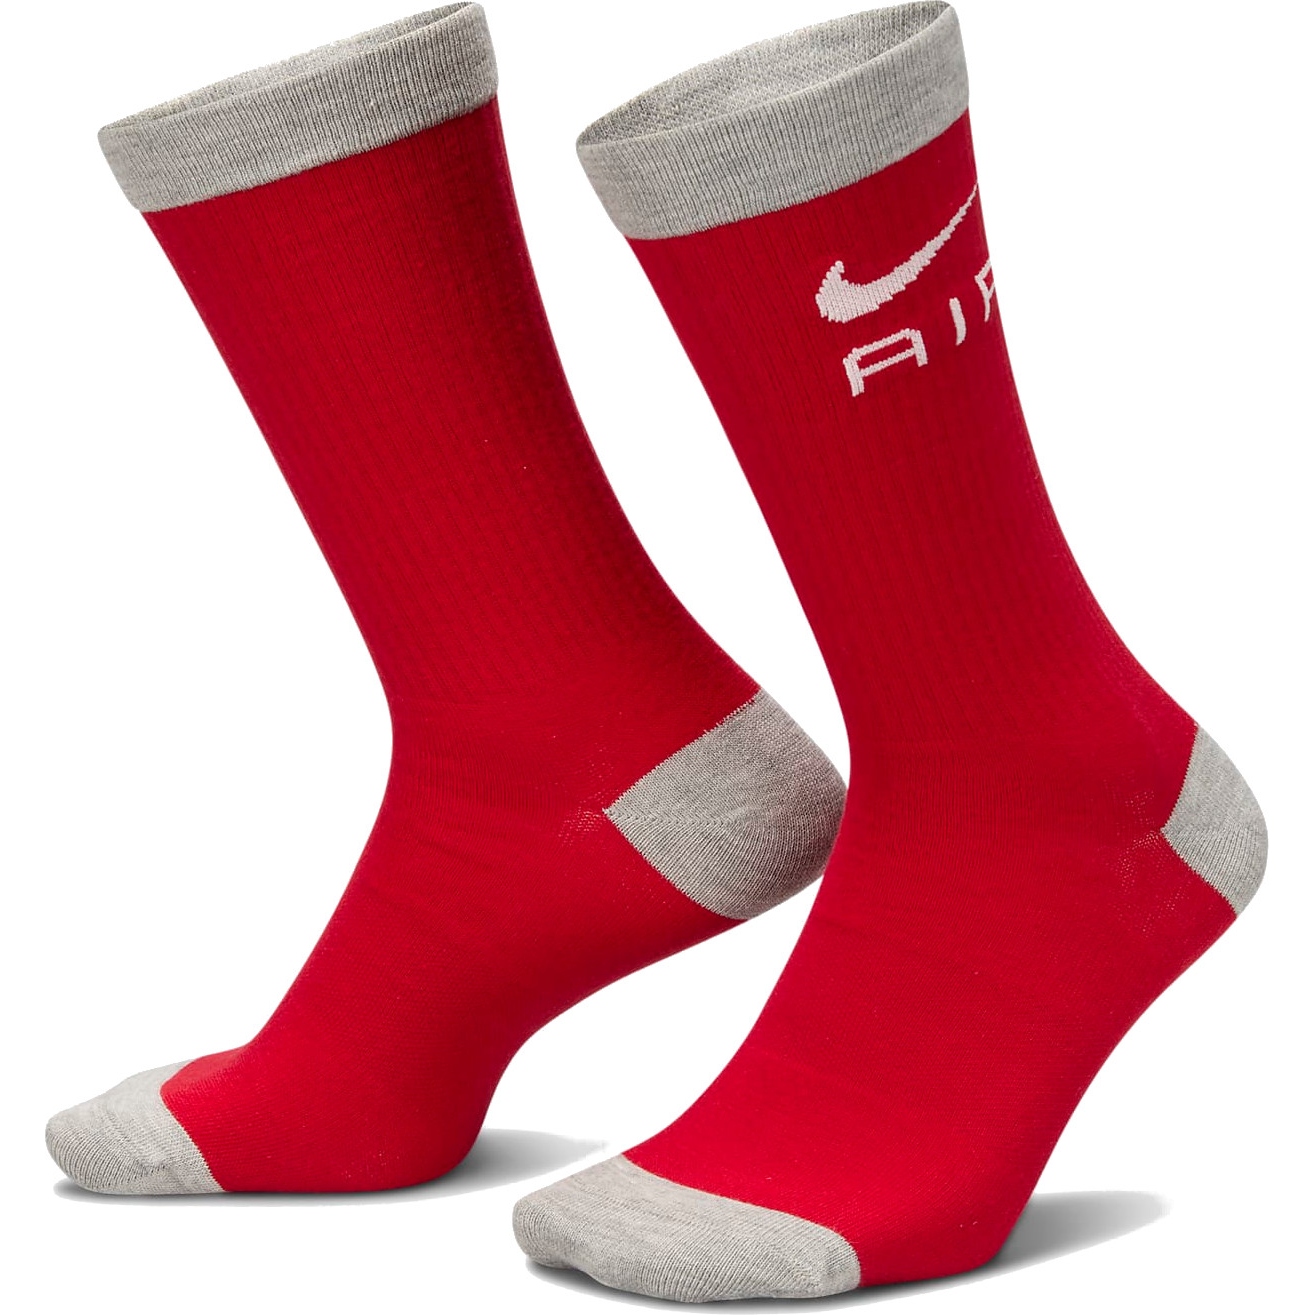 Picture of Nike Everyday Essential Crew Socks - 2 Pair - multi-color FN3149-901